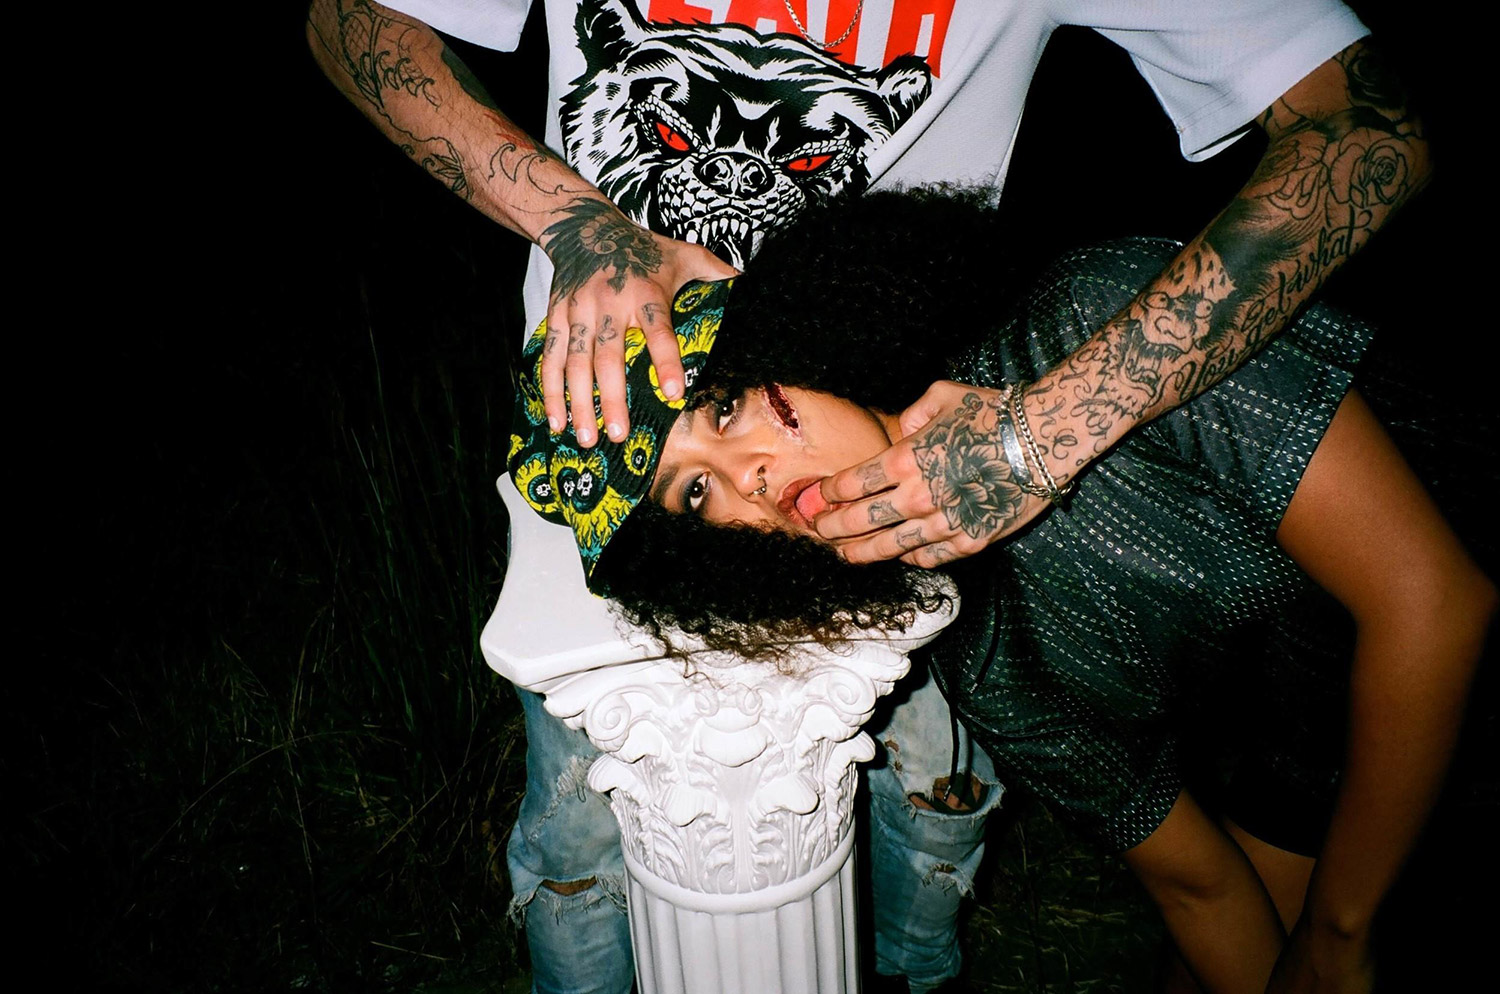 Pretty Puke, Miller Rodriguez - party photography, man and woman playing roughly at night